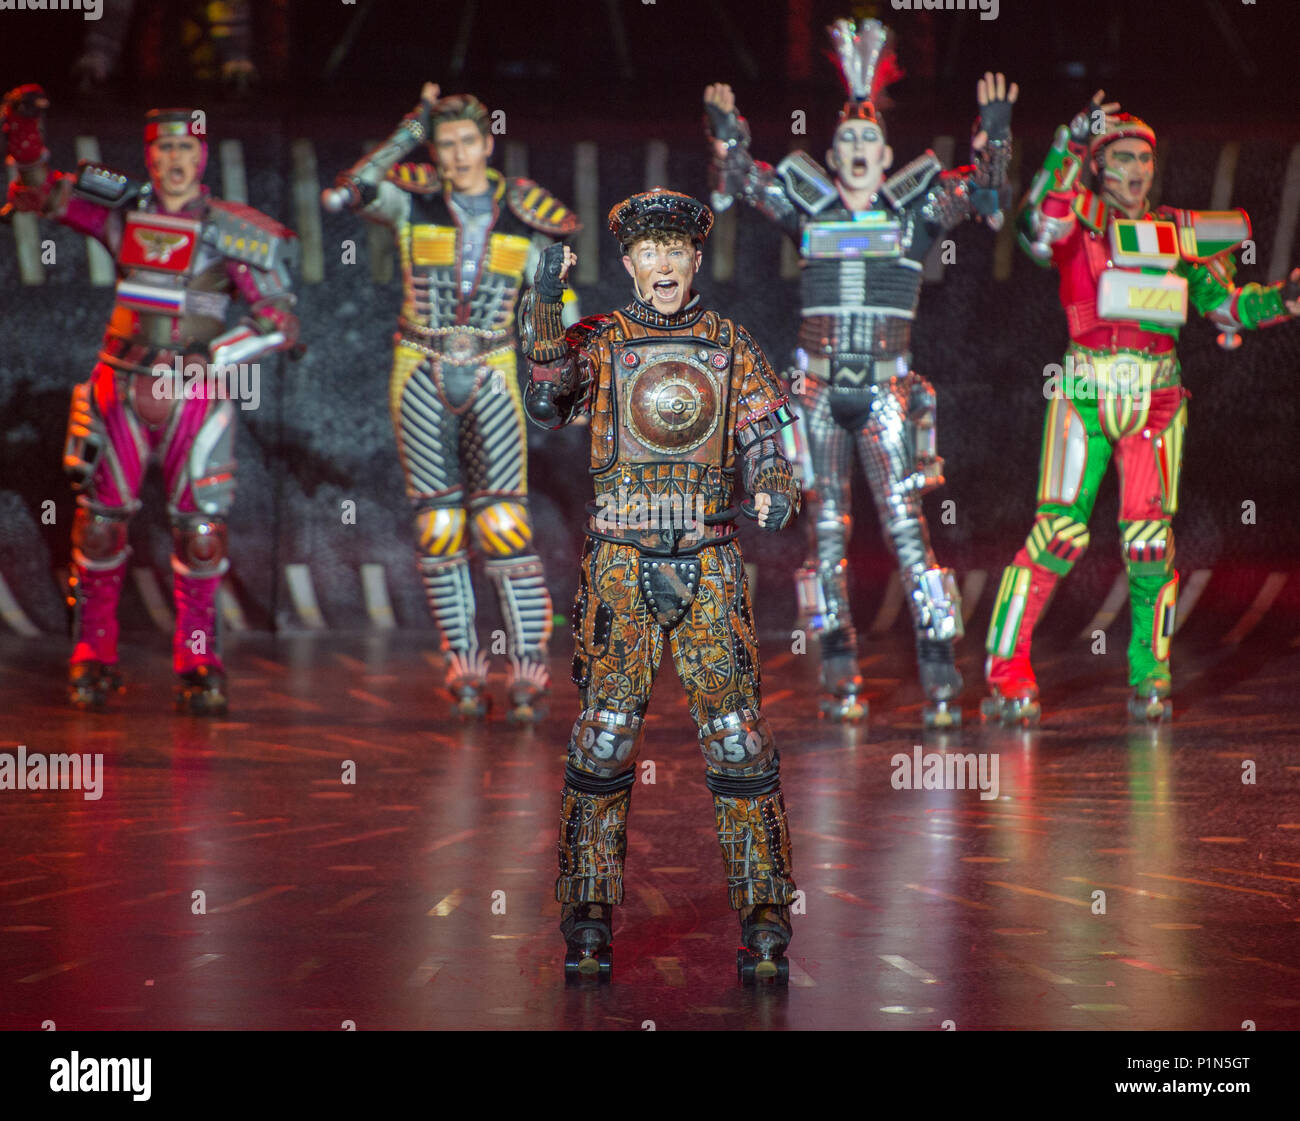 10 June 2018, Germany, Bochum: Blake Patrick Anderson (c) as Rusty the  Steam Engine in the musical Starlight Express. The musical has been  performed in Bochum continuously since 1988. A new version